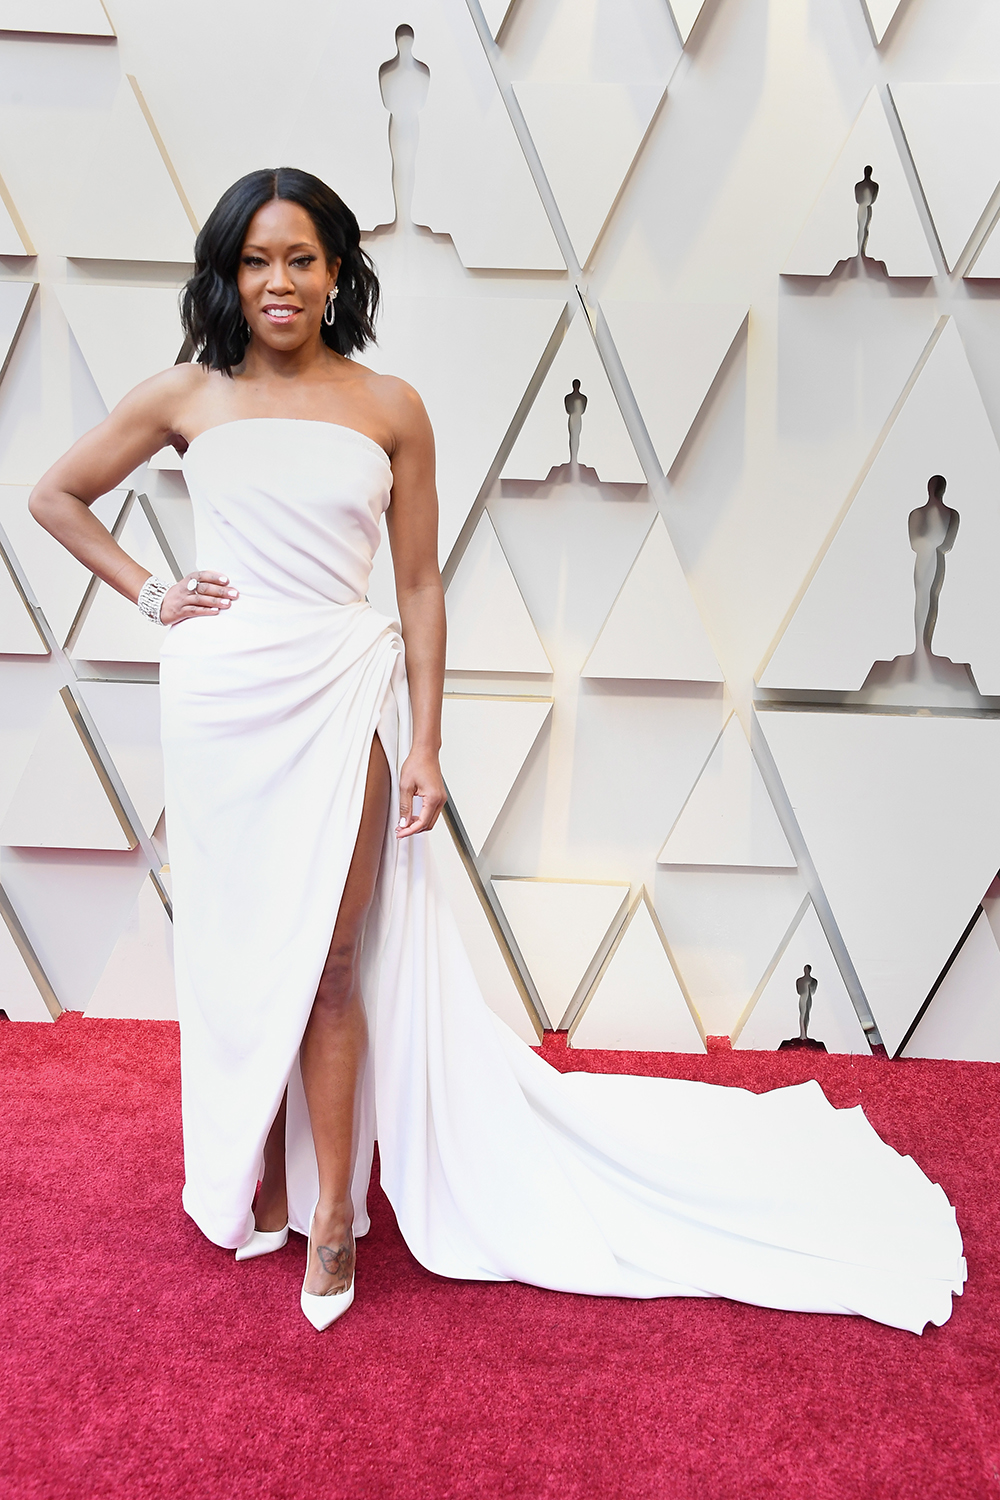 HOLLYWOOD, CA - FEBRUARY 24: Regina King attends the 91st Annual Academy Awards at Hollywood and Highland on February 24, 2019 in Hollywood, California. (Photo by Steve Granitz/WireImage)